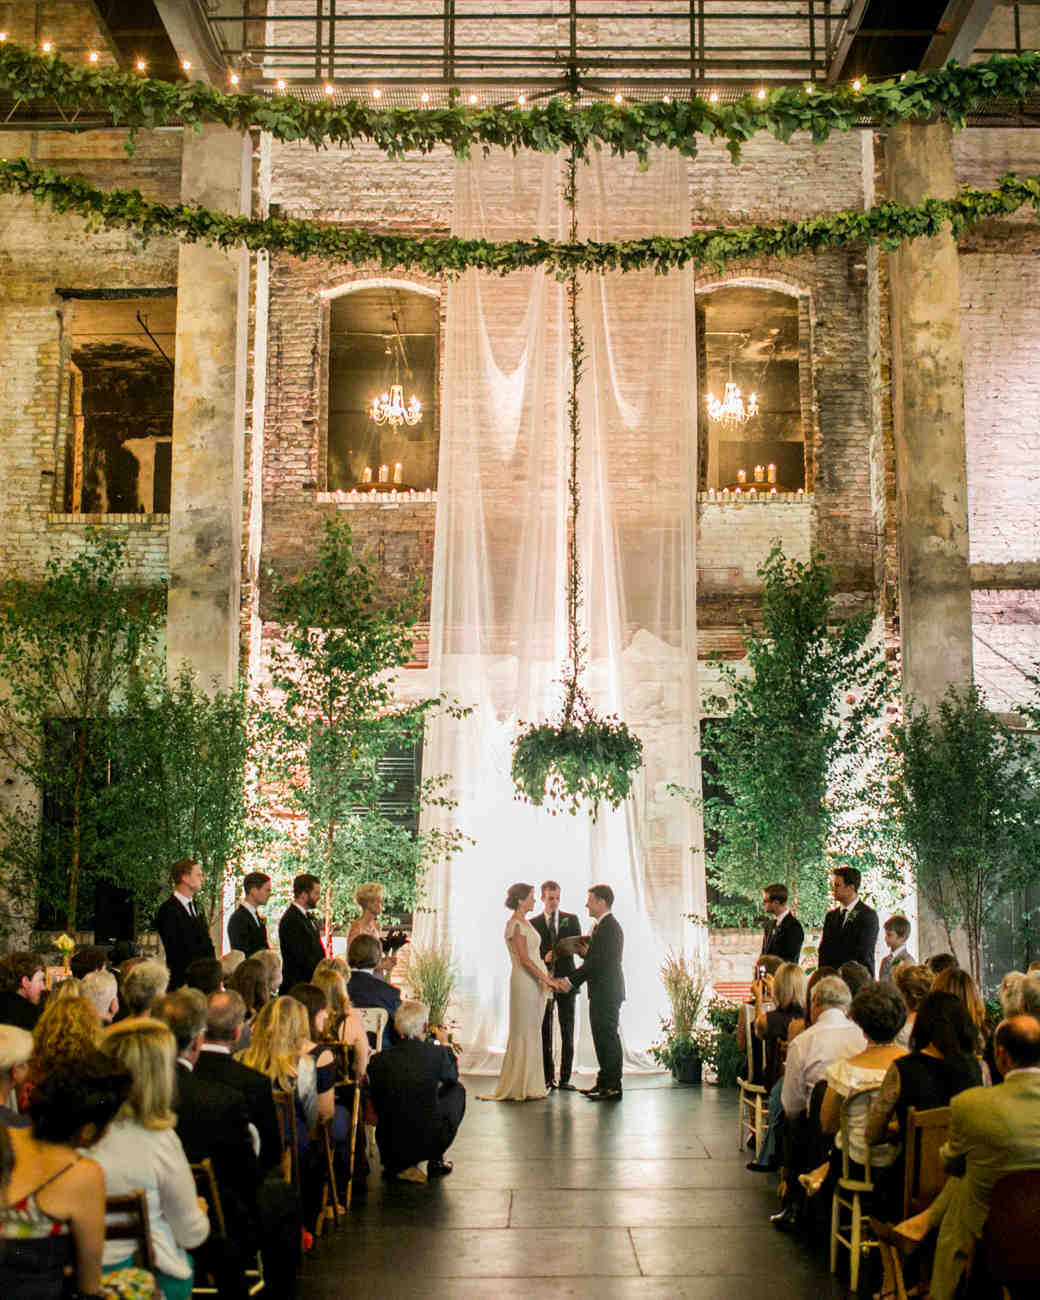 Beautiful Wedding Venues
 Restored Warehouses Where You Can Tie the Knot